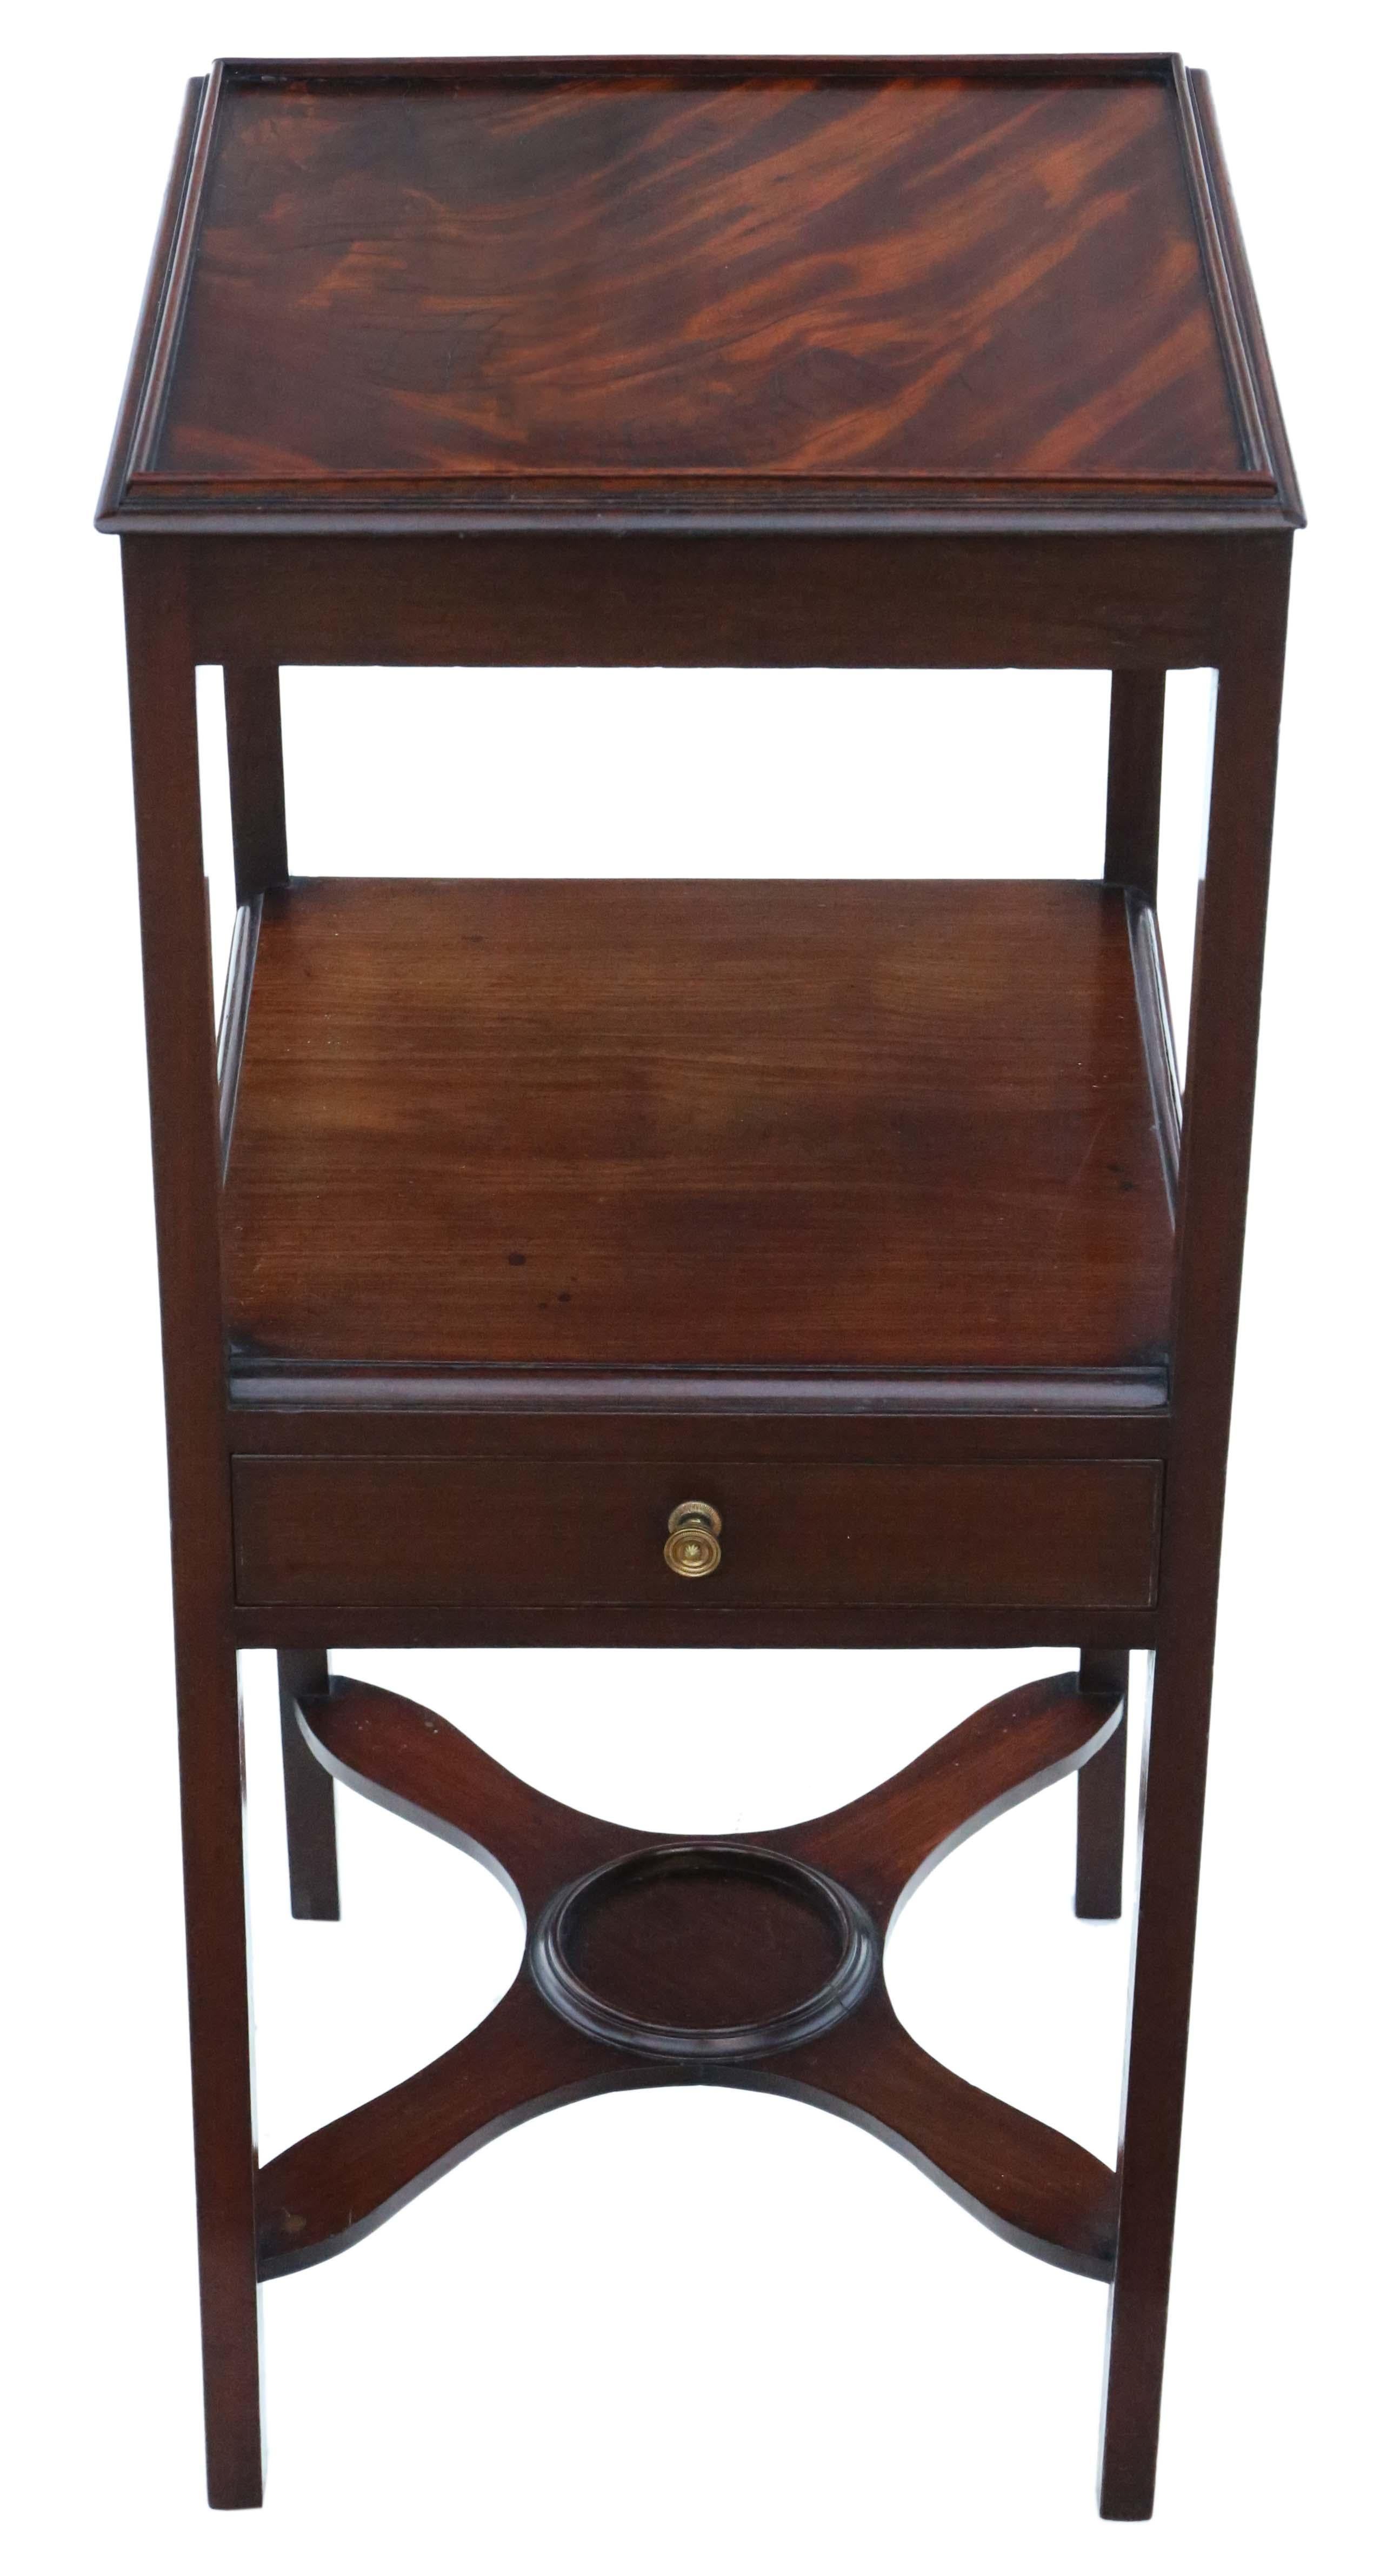 Antique quality mahogany washstand bedside table Georgian nightstand 19th Century.

Great rare item with no loose joints and no woodworm. The oak lined drawer slides freely.

Lovely age, colour and patina.

38cm wide x 41cm deep x 86cm high.

In